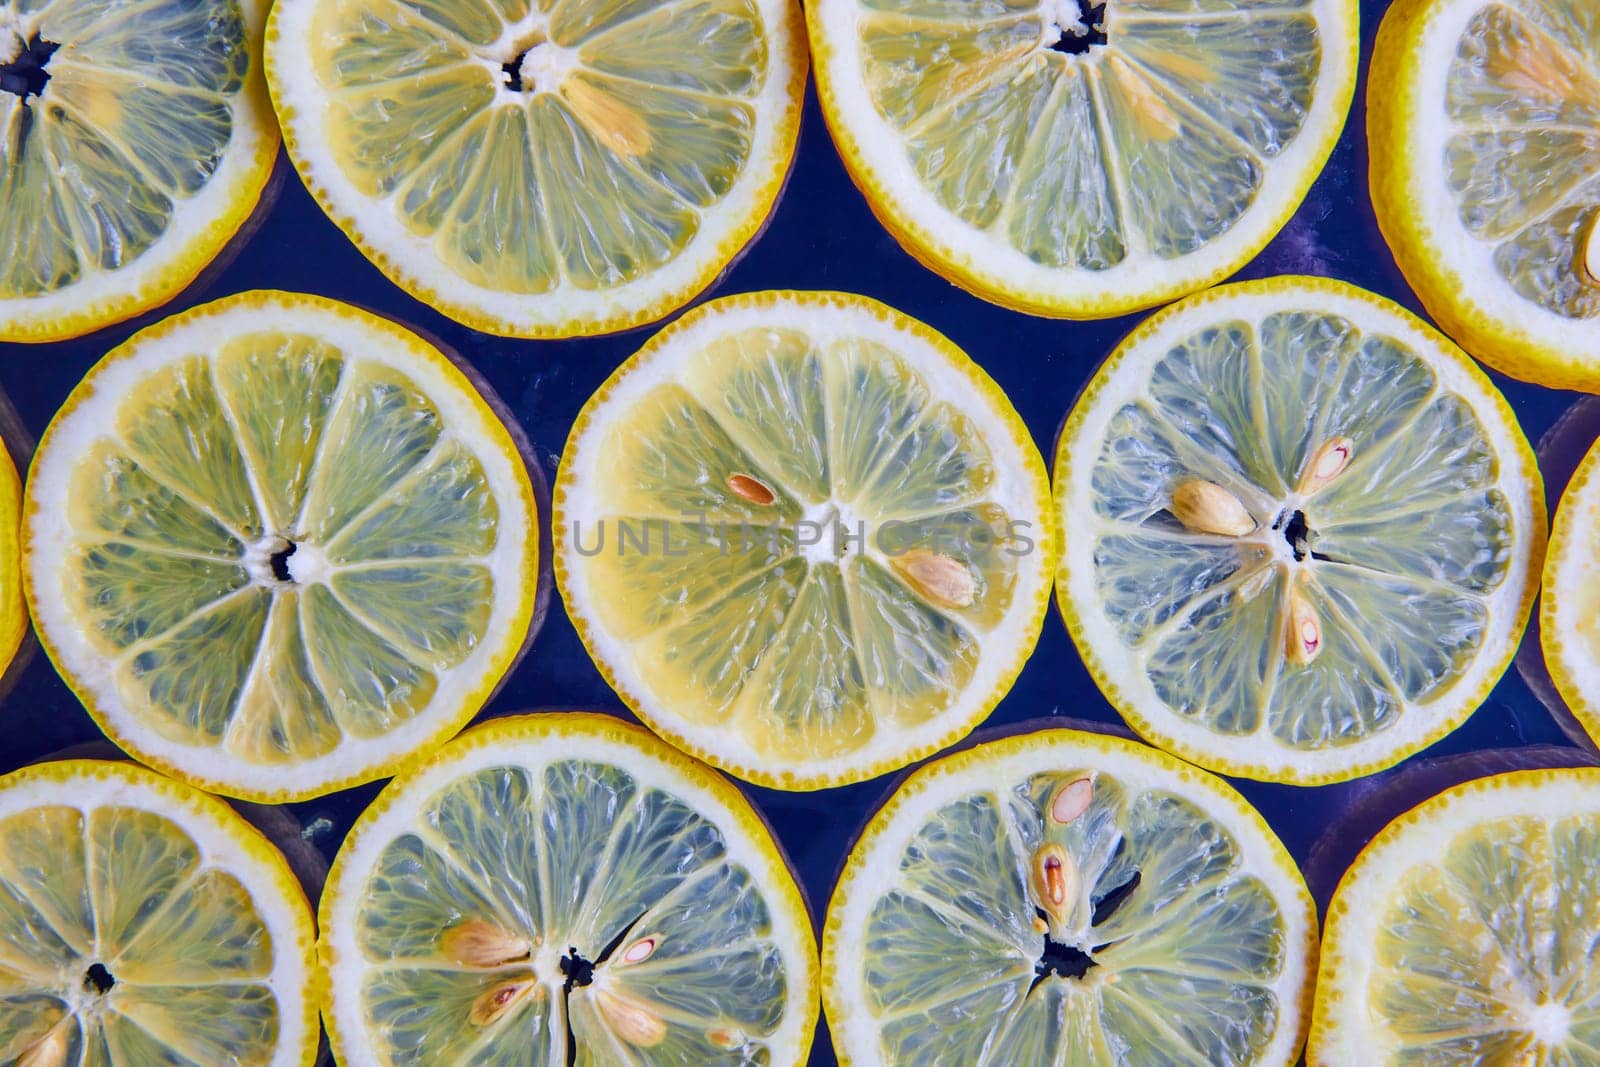 Image of See through lemon slices with seeds on navy blue background